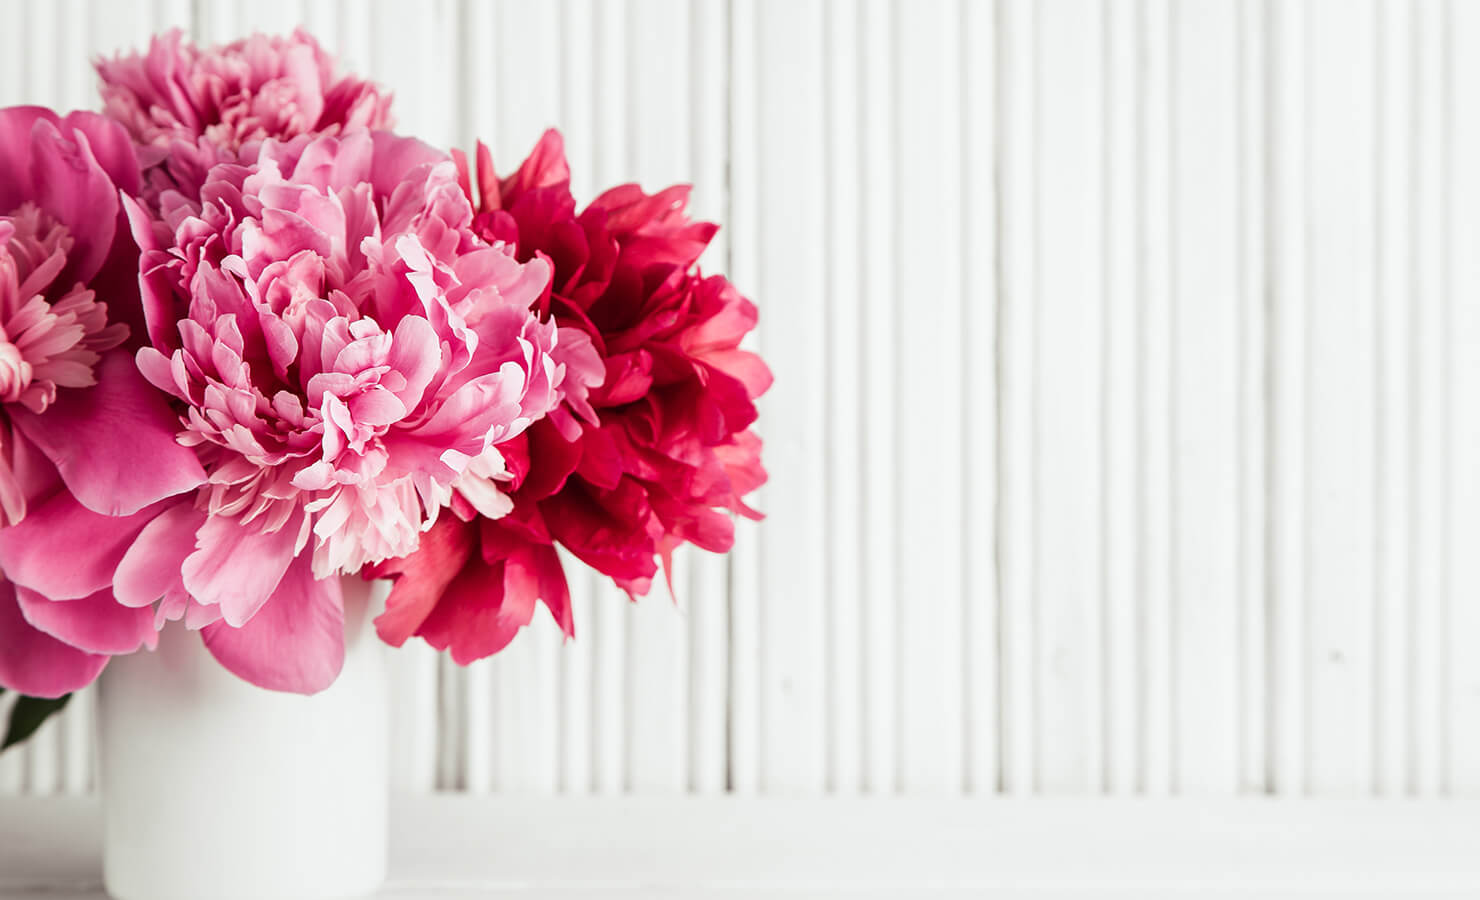 5 Reasons To Send Peonies To Your Loved Ones in Malaysia